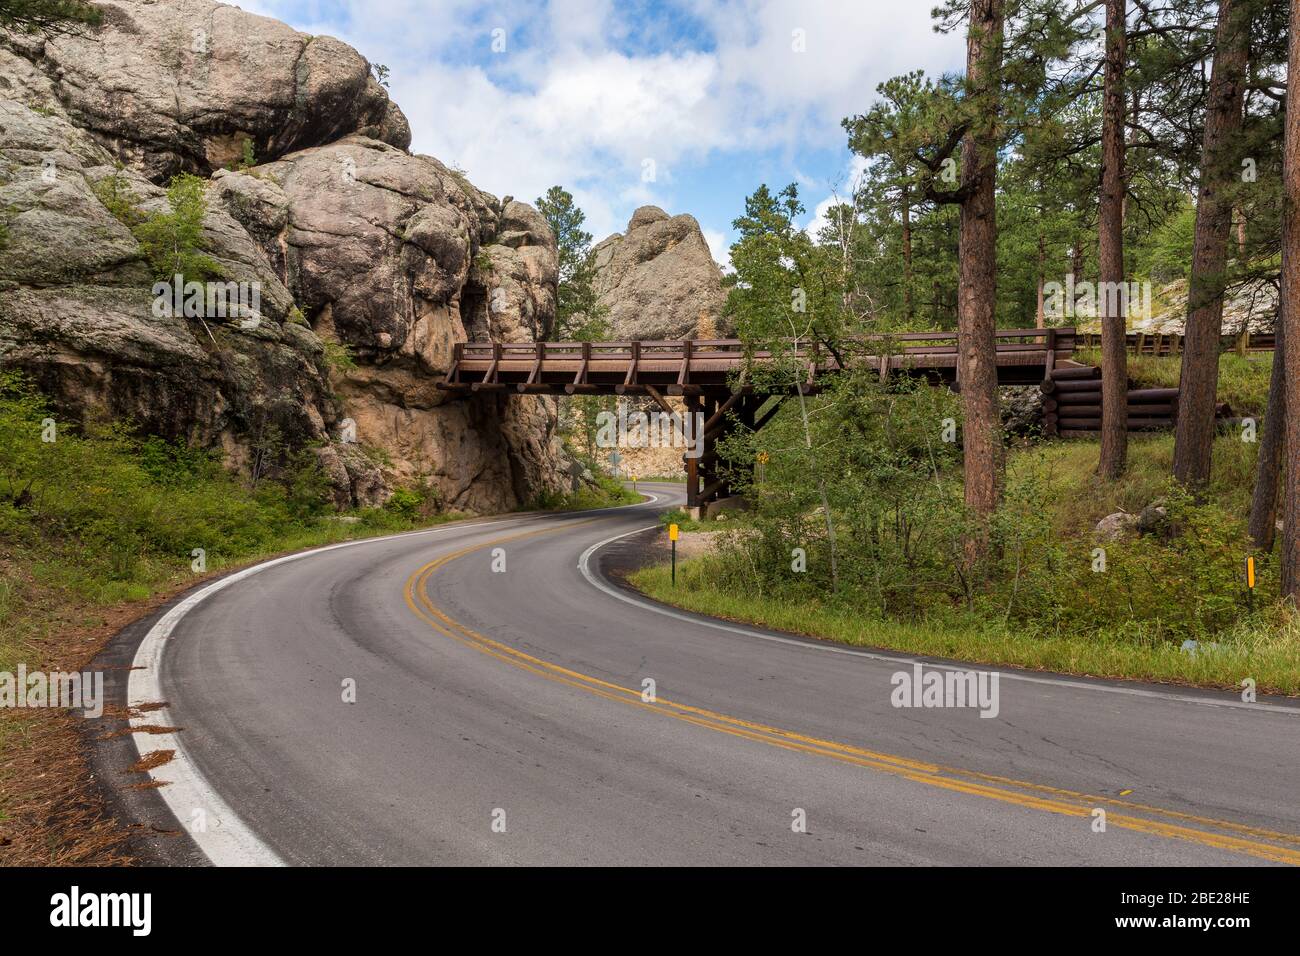 A road with an over and under bridge with a tunnel through a rock. Stock Photo